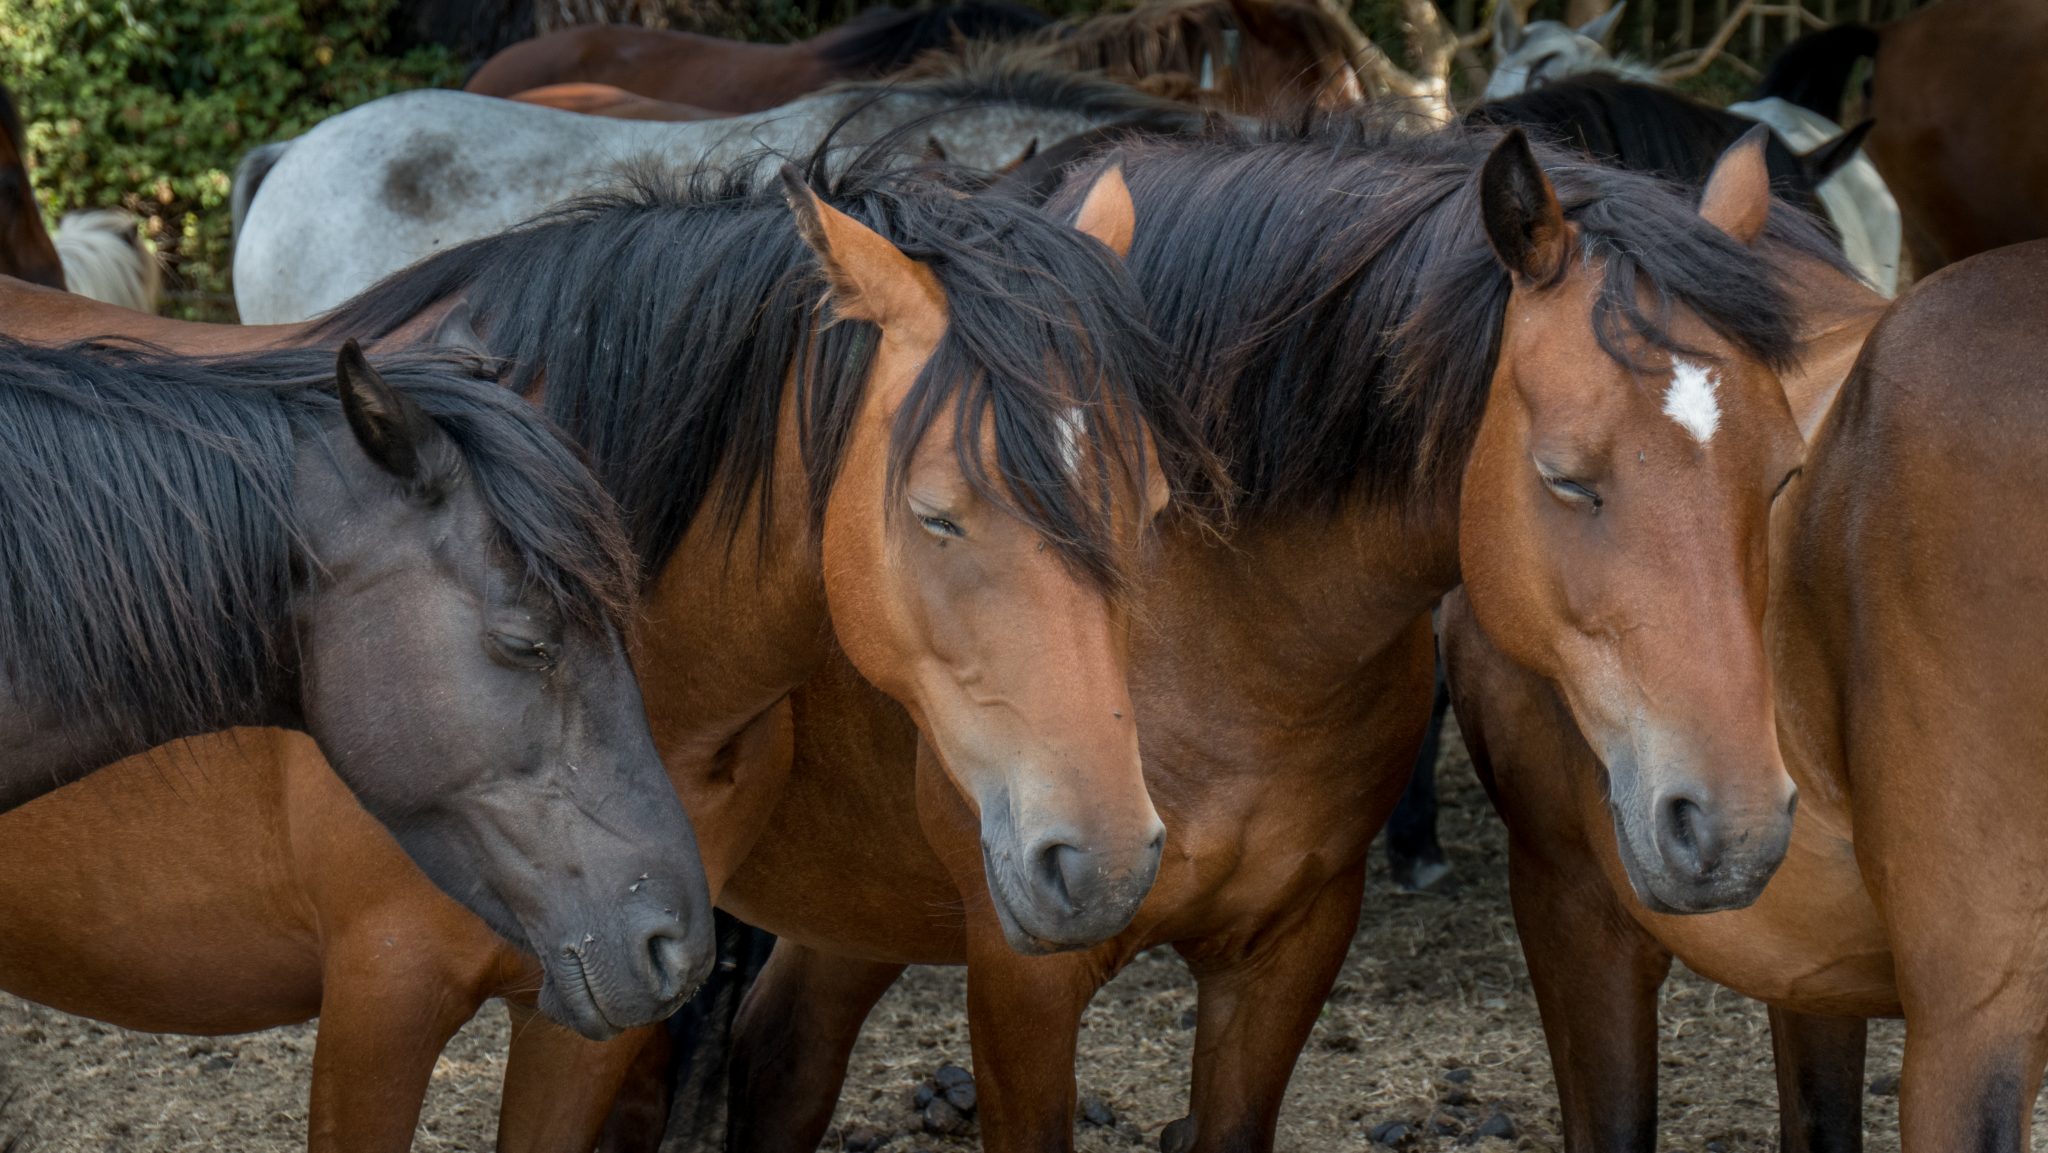 Why do horses sleep standing up while many other species do not?